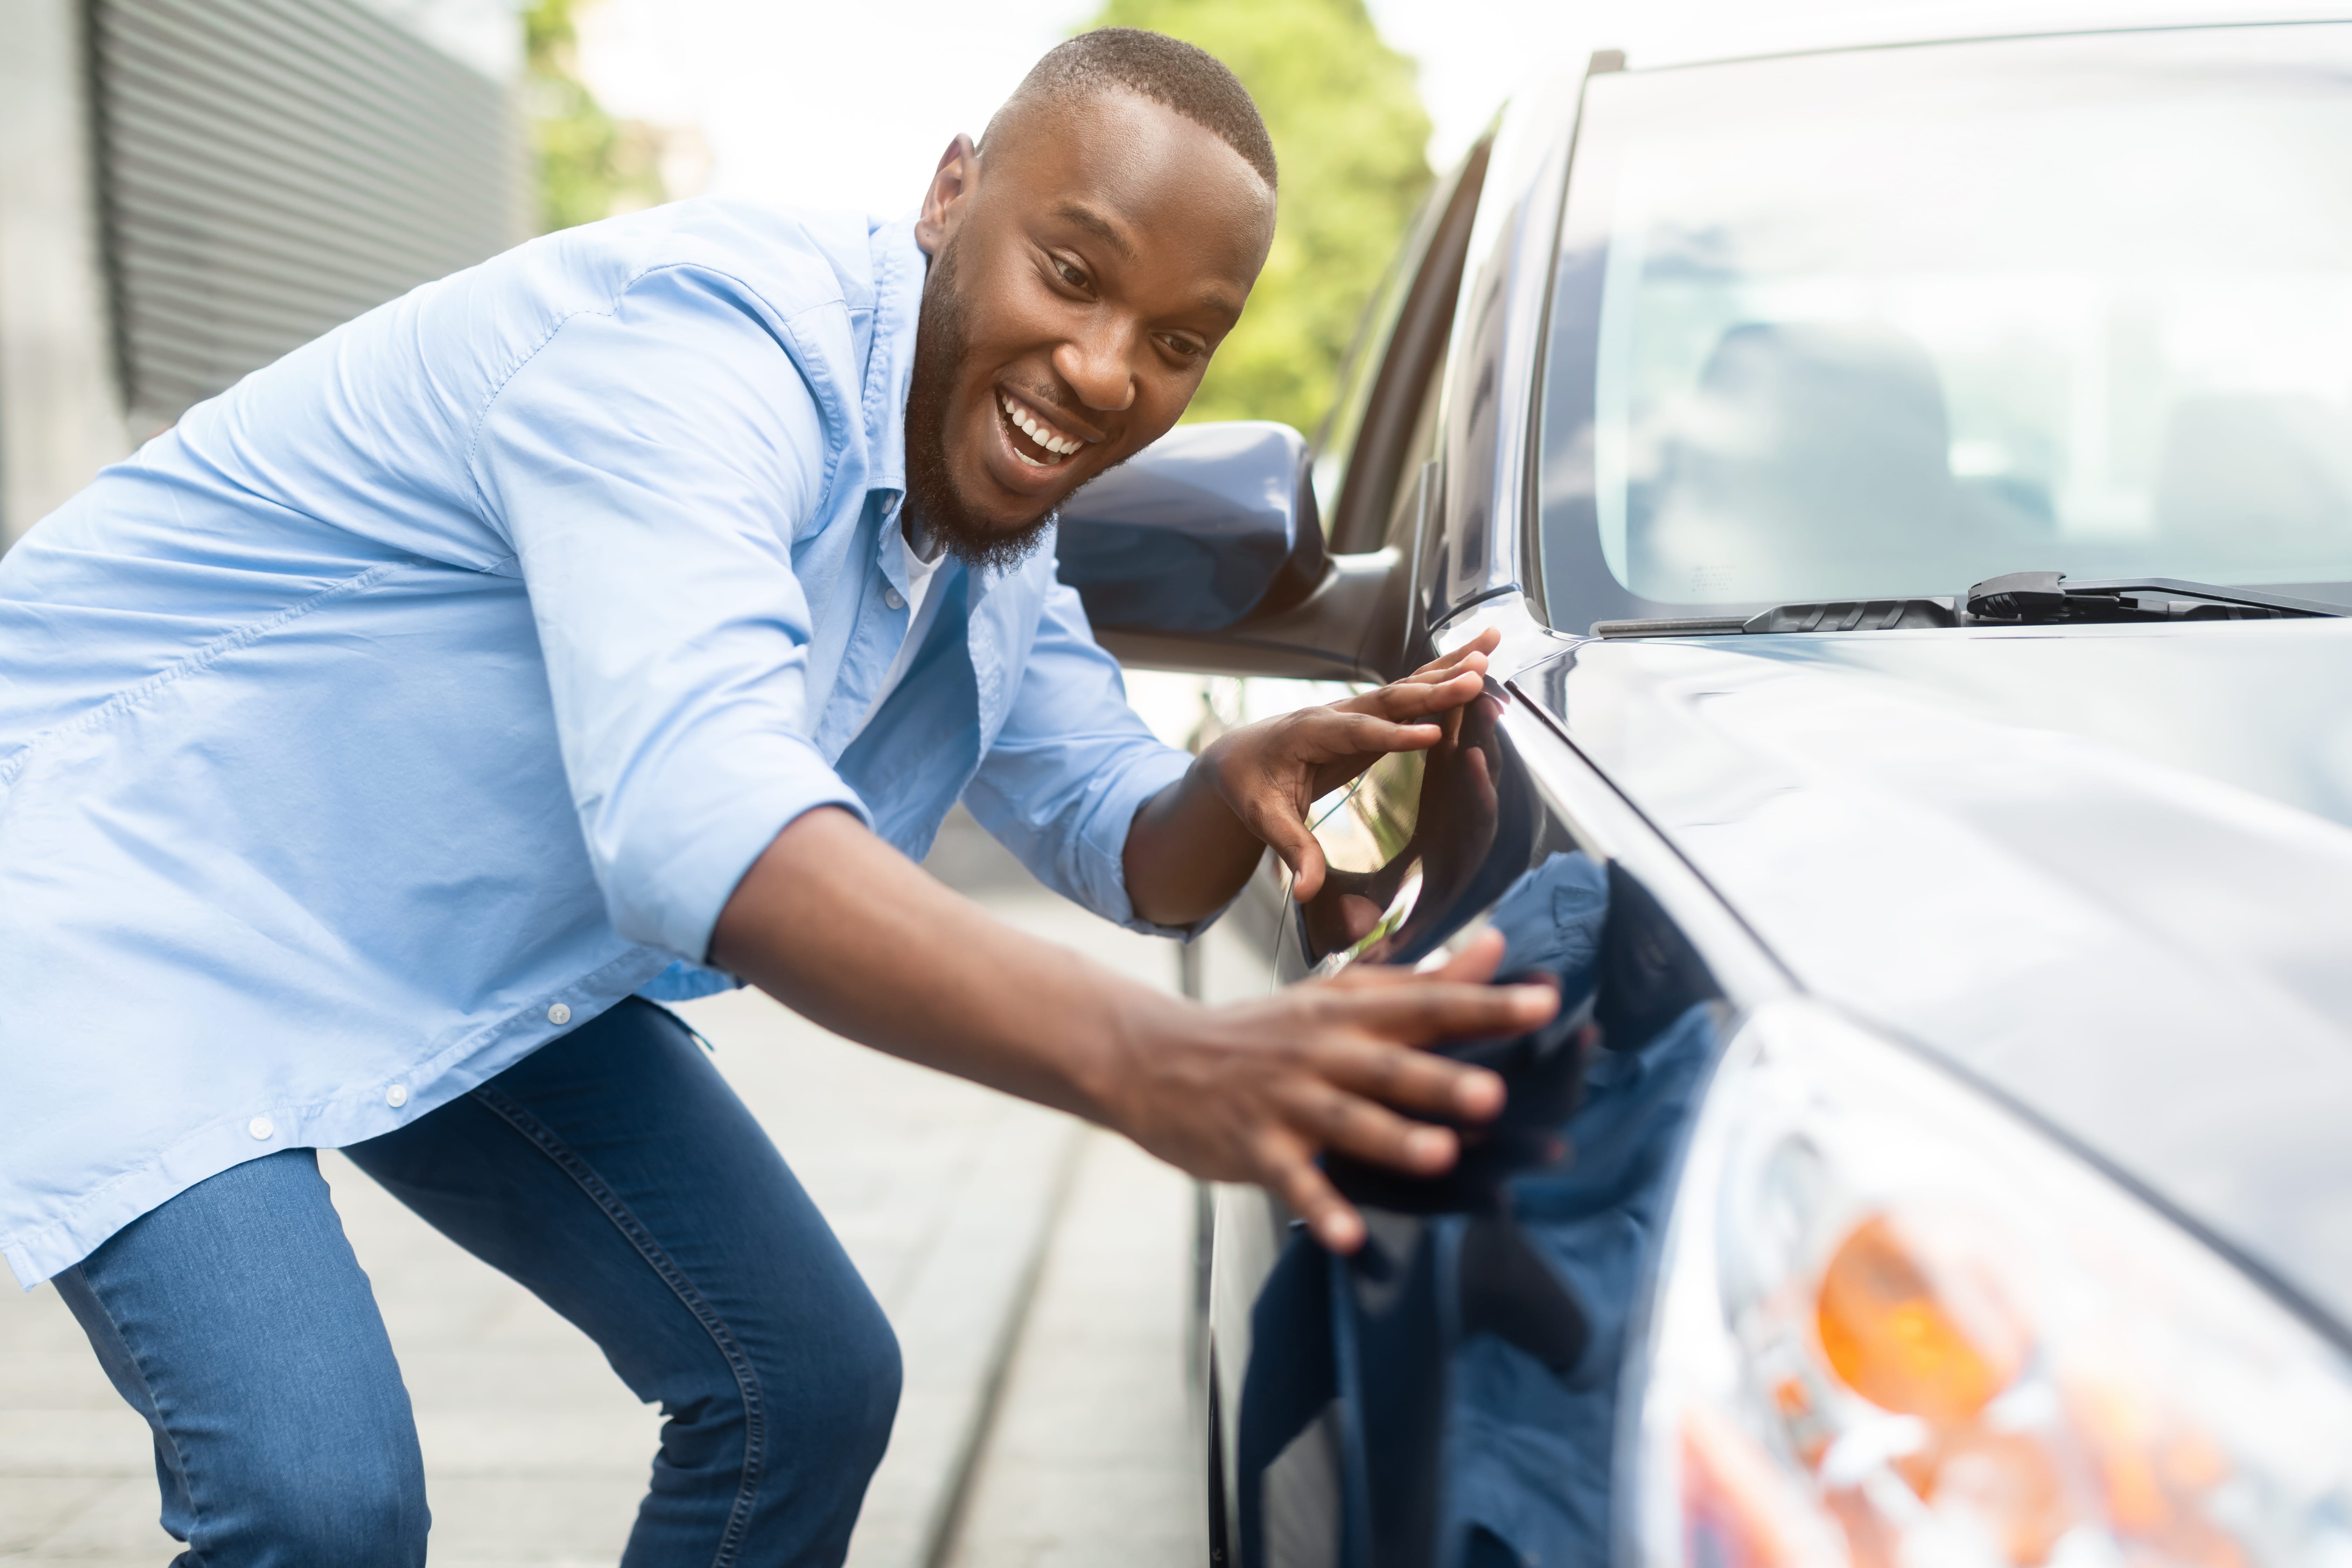 Happy Car Buyer, New Car Owner Concept. Portrait Of Excited Young African American Guy Touching His New Luxury Automobile After Purchase In Dealership Showroom. Selective Focus